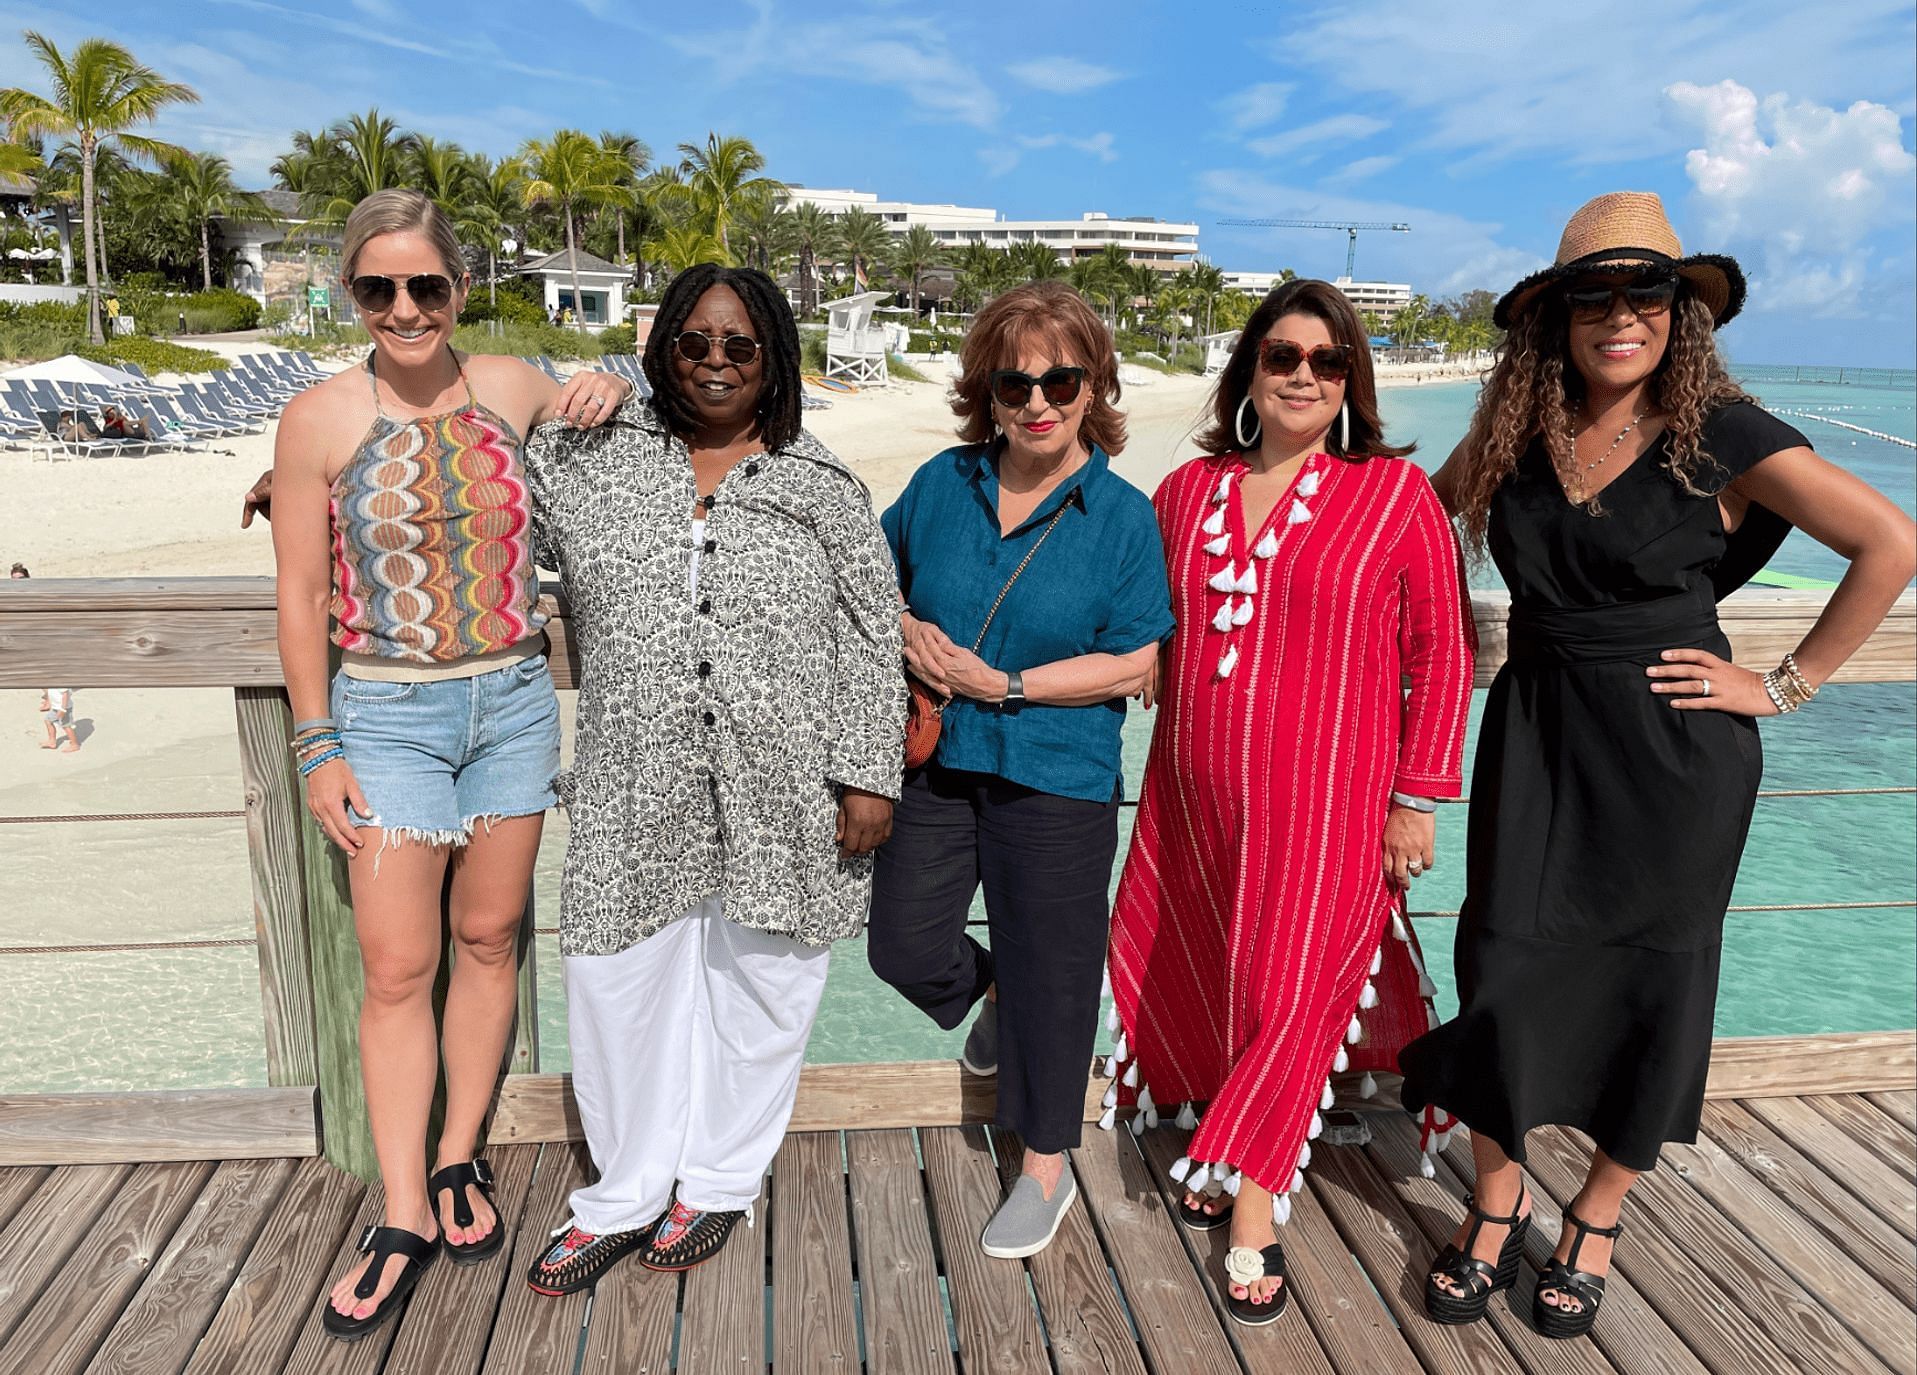 The show&rsquo;s hosts vacationing in the Bahamas received criticism from Twitter users as the Bahamas has strict abortion laws. (Image via @TheView/Twitter)